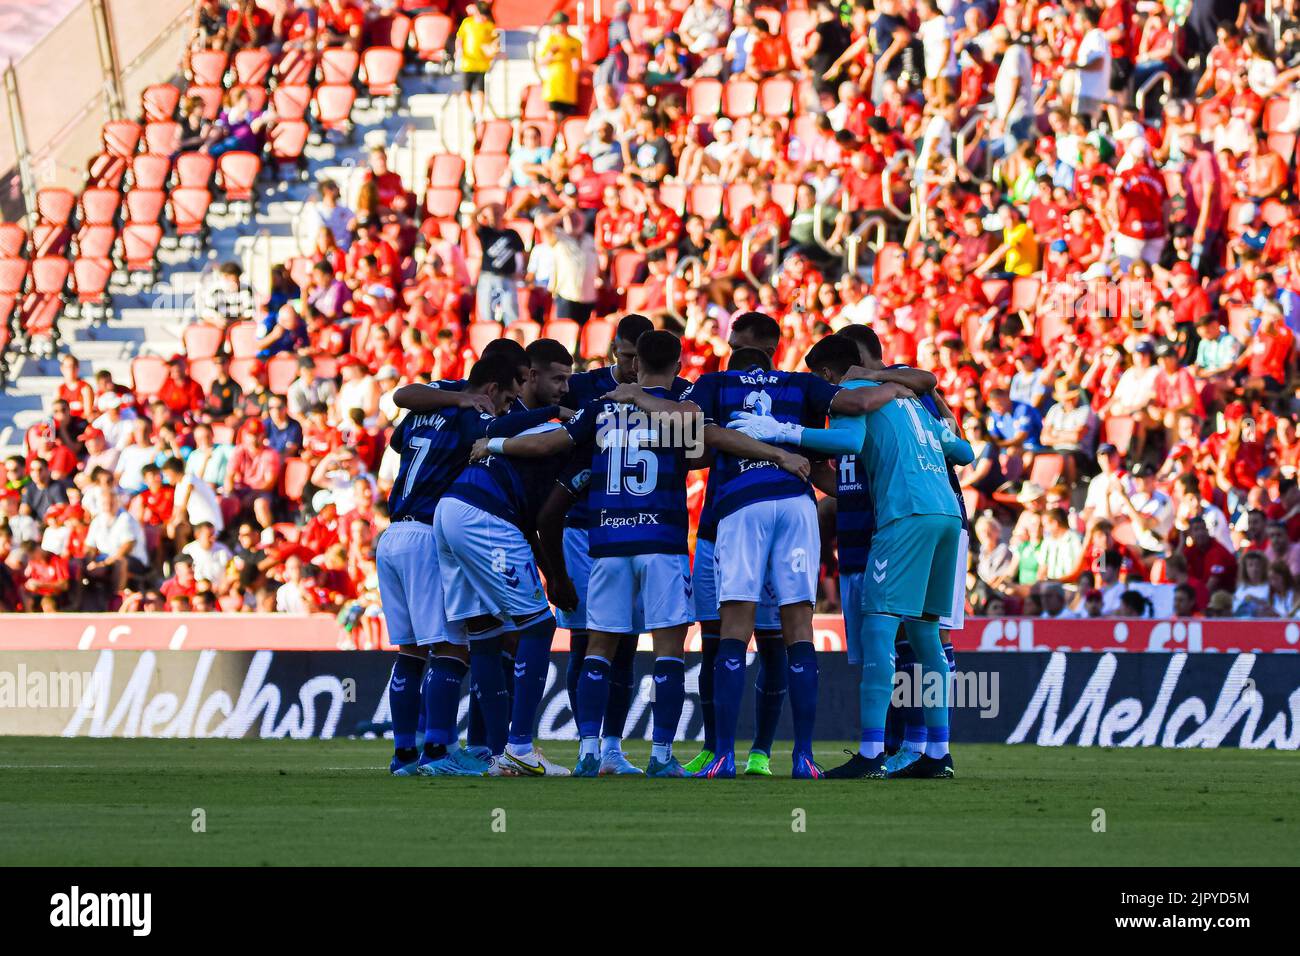 MALLORCA, SPAIN - AUGUST 20: Betis players the match between RCD Mallorca and Real Betis of La Liga Santander on August 20, 2022 at Visit Mallorca Stadium Son Moix in Mallorca, Spain. (Photo by Samuel Carreño/PxImages) Stock Photo